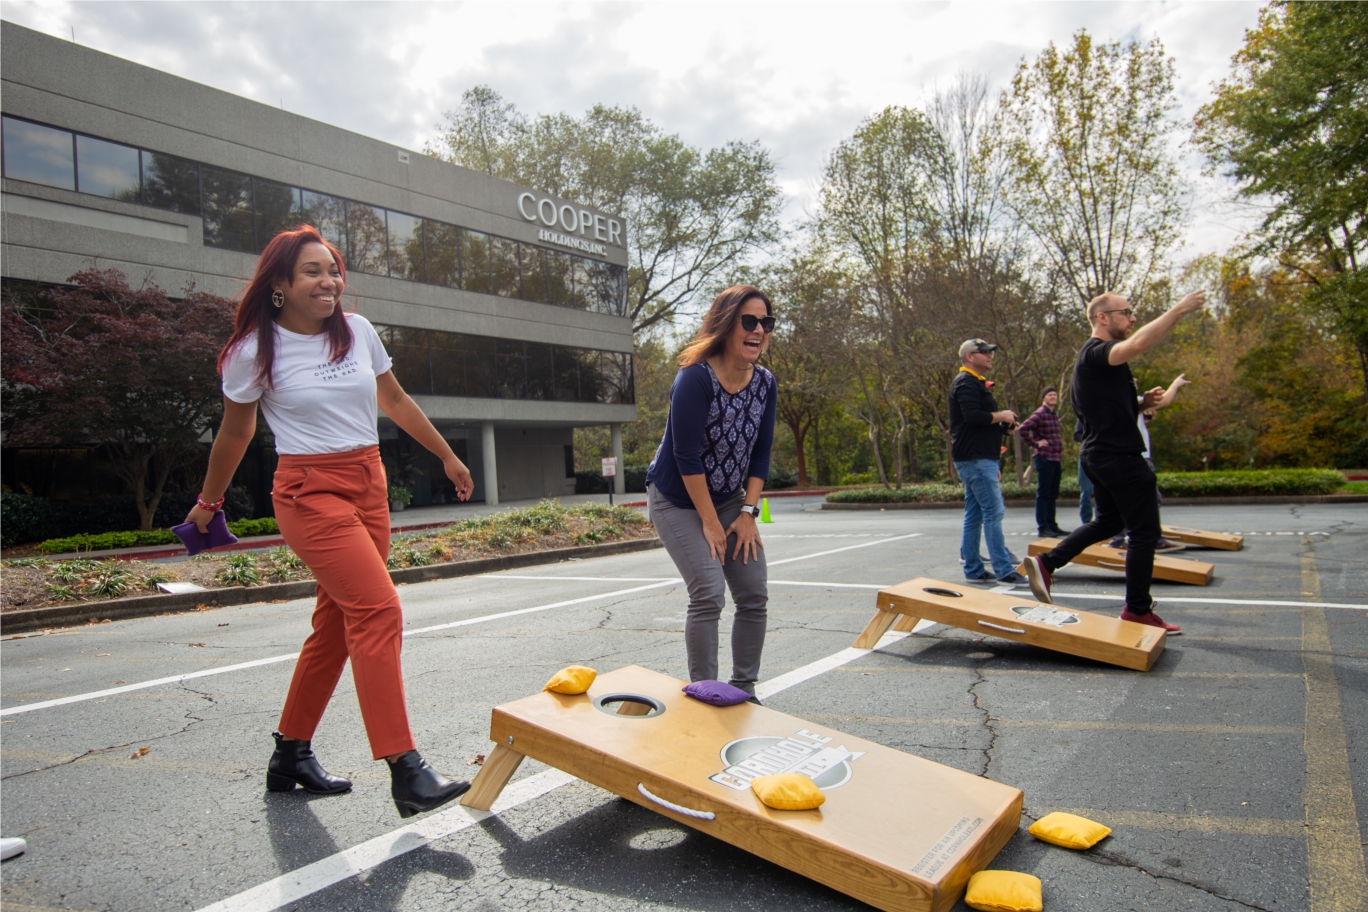 The annual cornhole tournament is a favorite among employees and brings out everyone's competitive side.